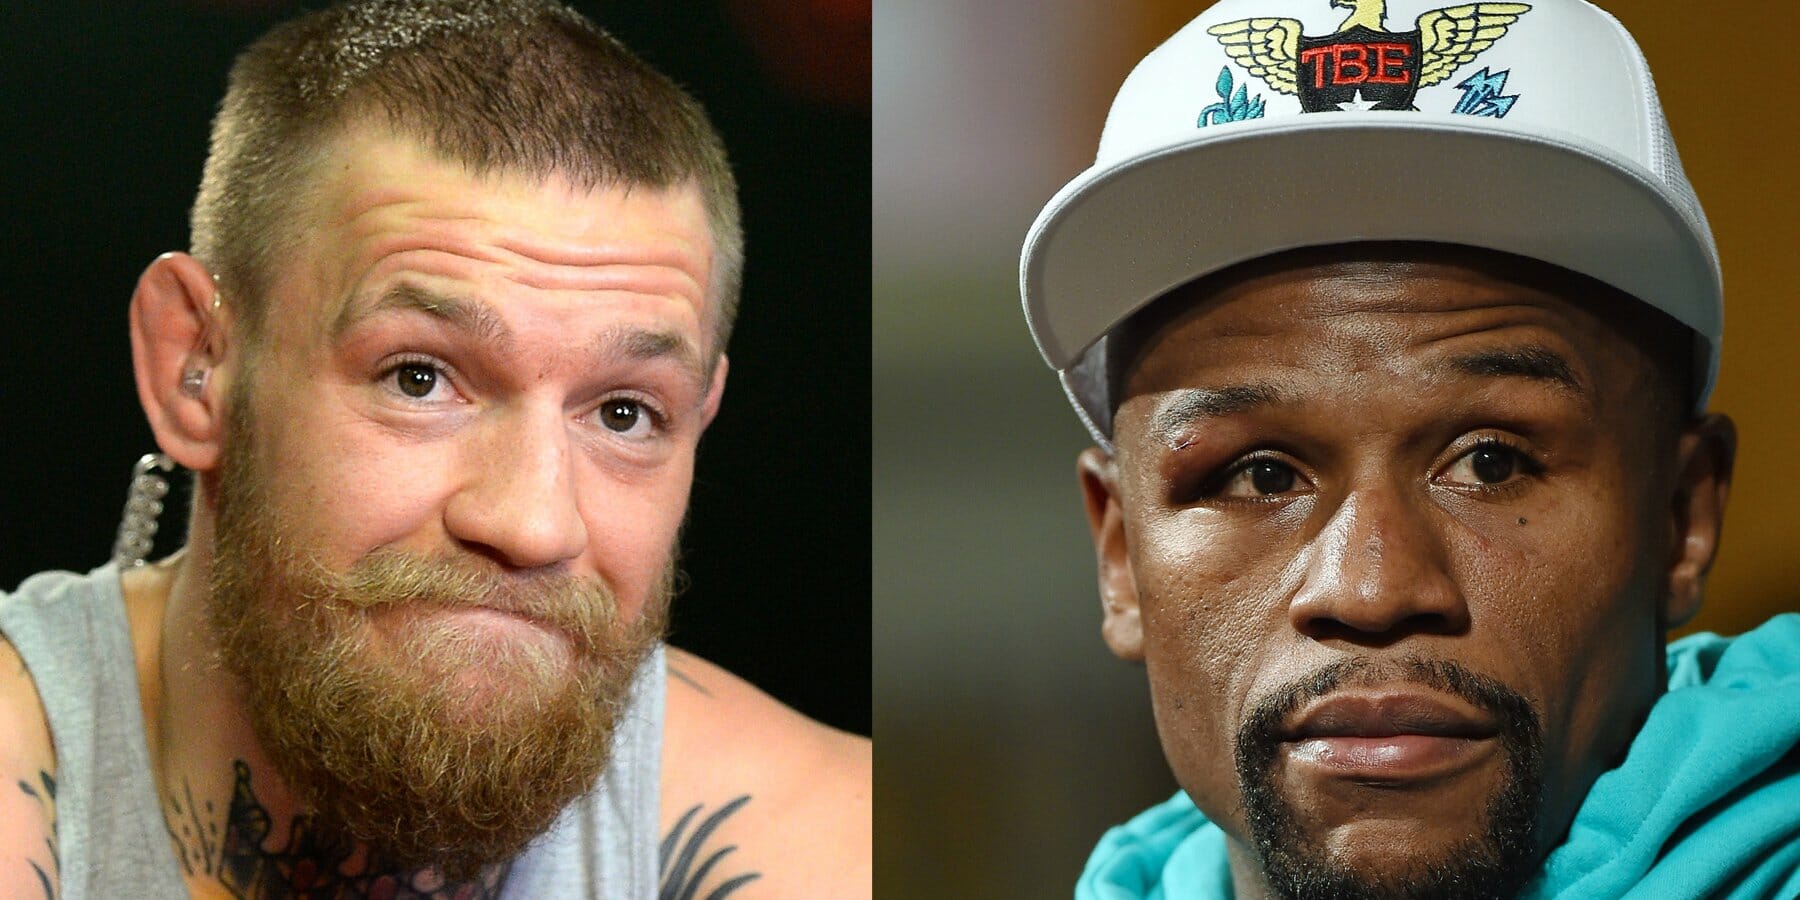 Floyd Mayweather and Conor Mcgregor mega fight in Las Vegas